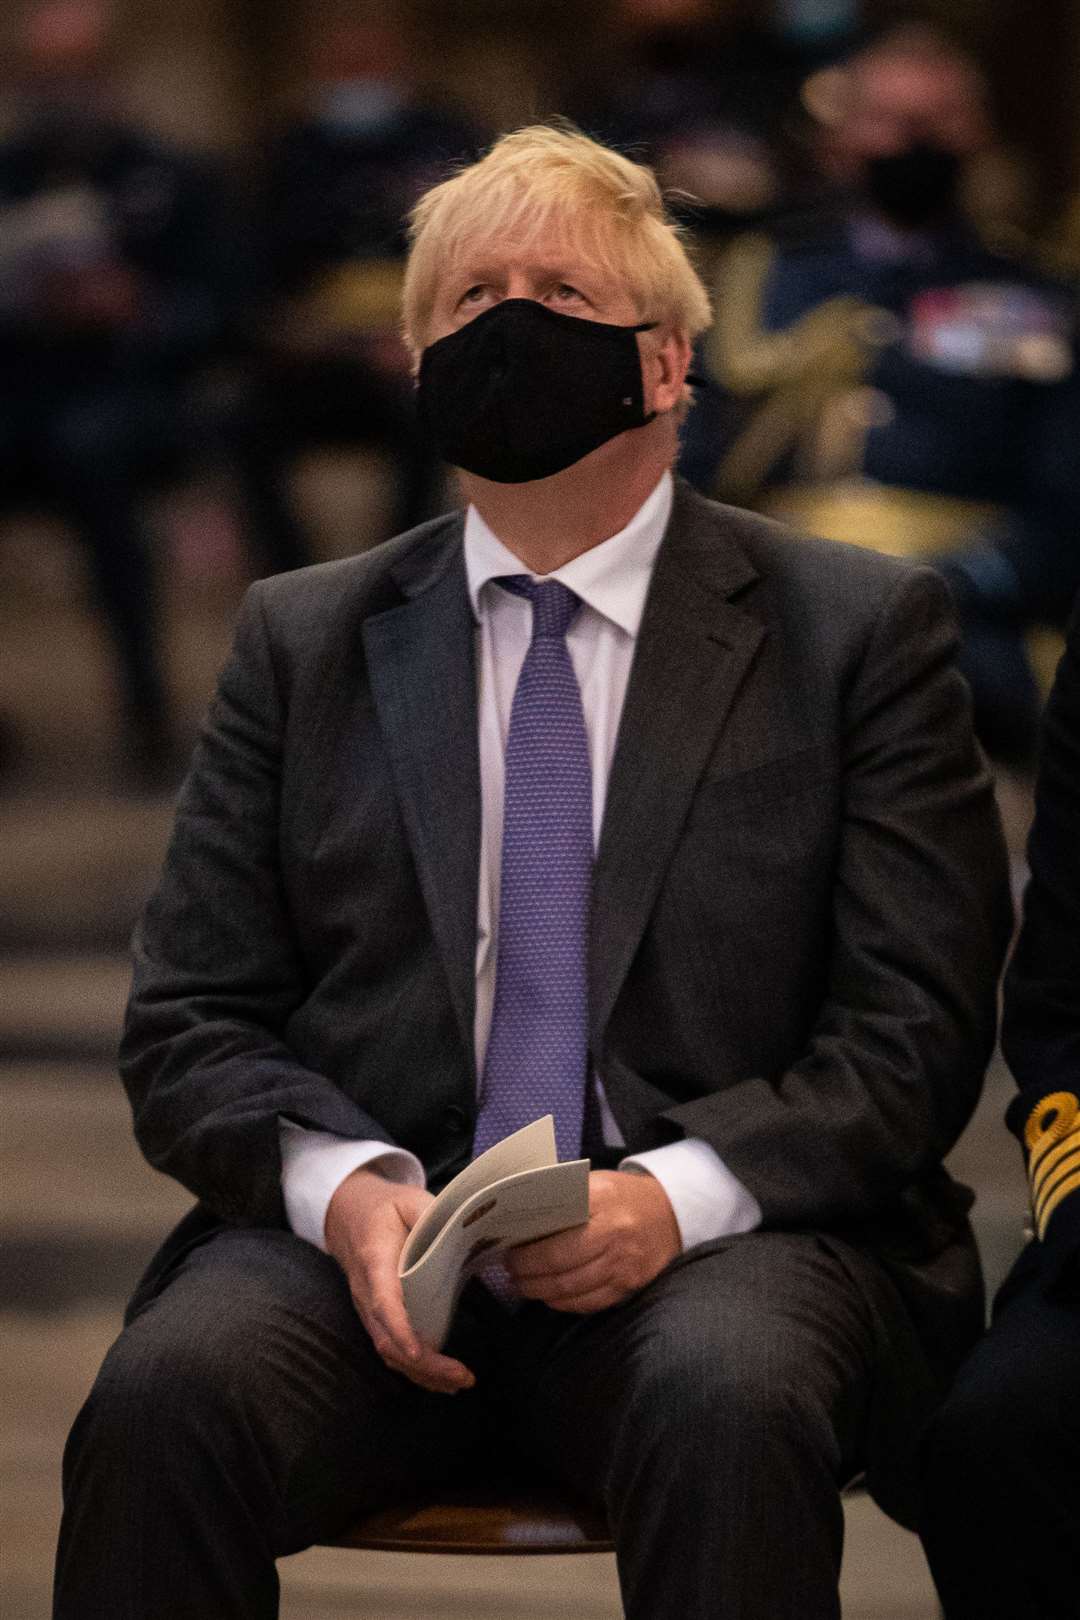 Boris Johnson during a service to mark the 80th anniversary of the Battle of Britain at Westminster Abbey (Aaron Chown/PA)